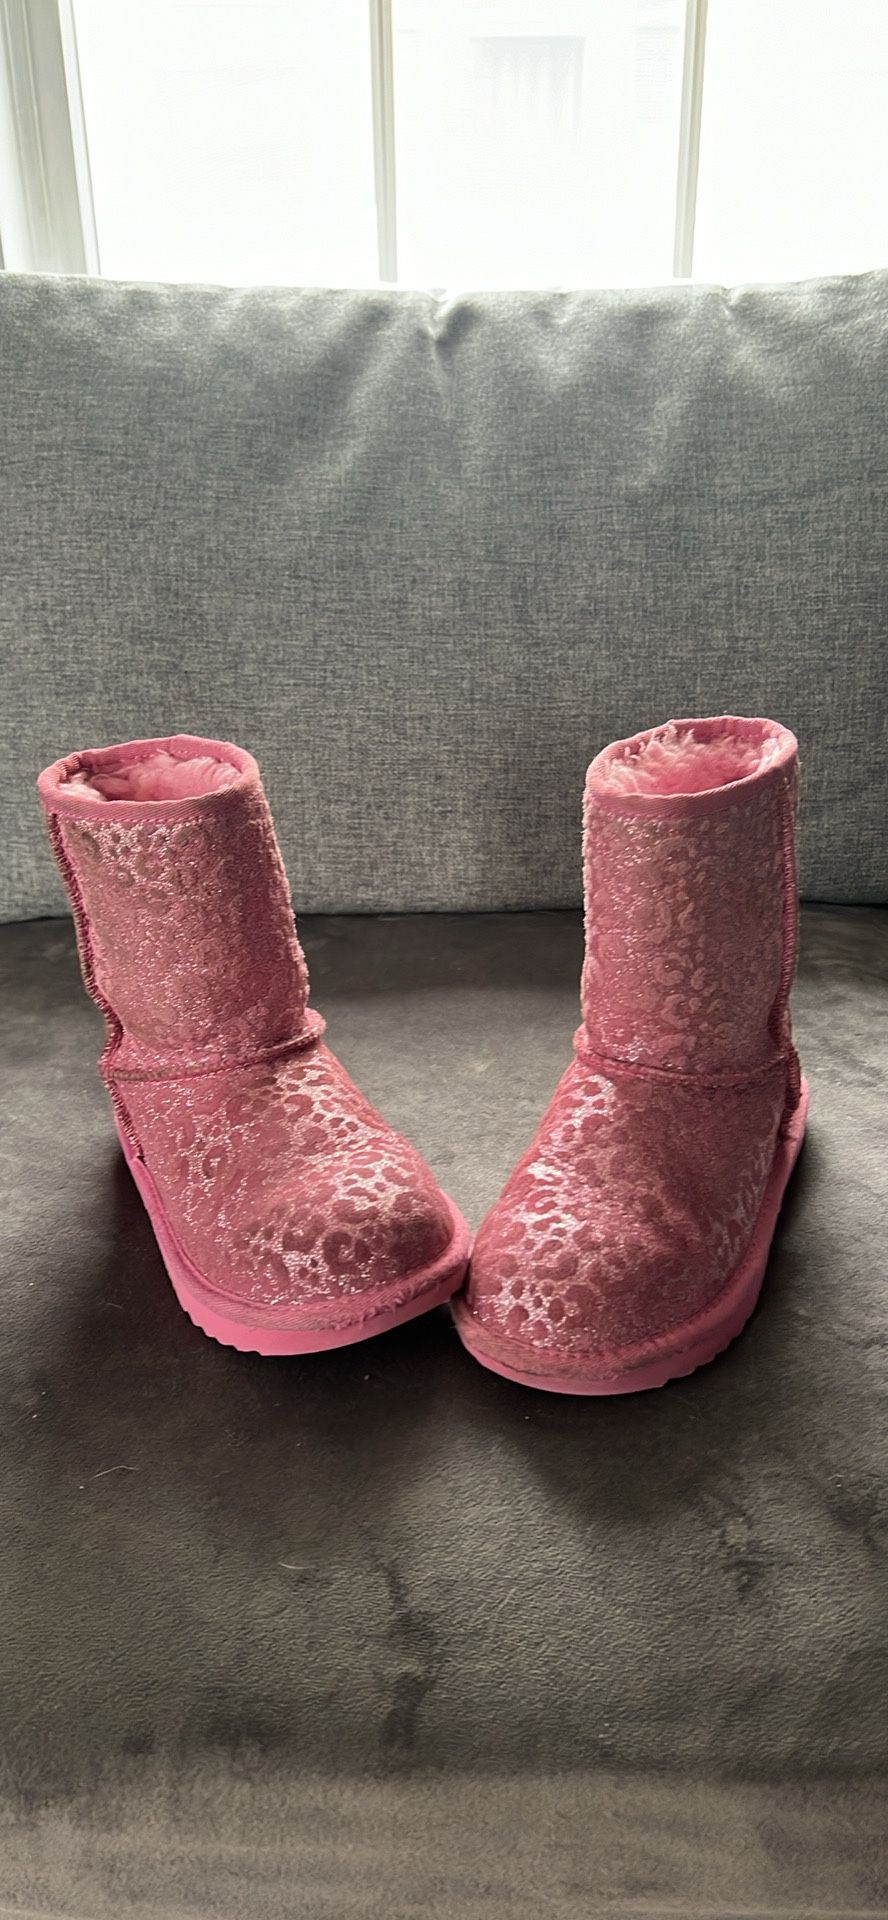 Kids Size 2 pink UGGS